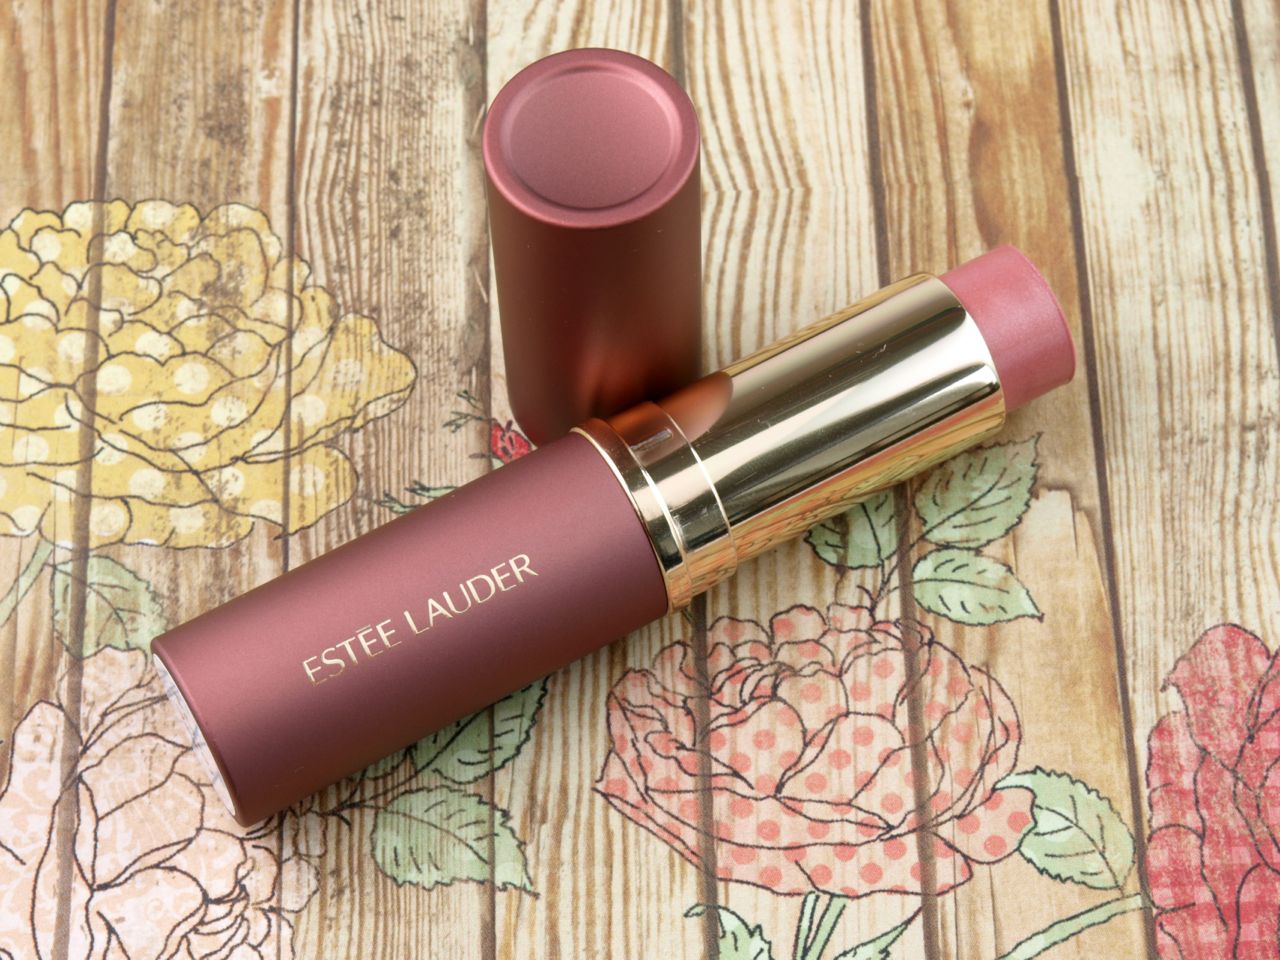 Estee Lauder Pure Color All-Over Illuminator Shimmering Highlight for Face & Body: Review and Swatches